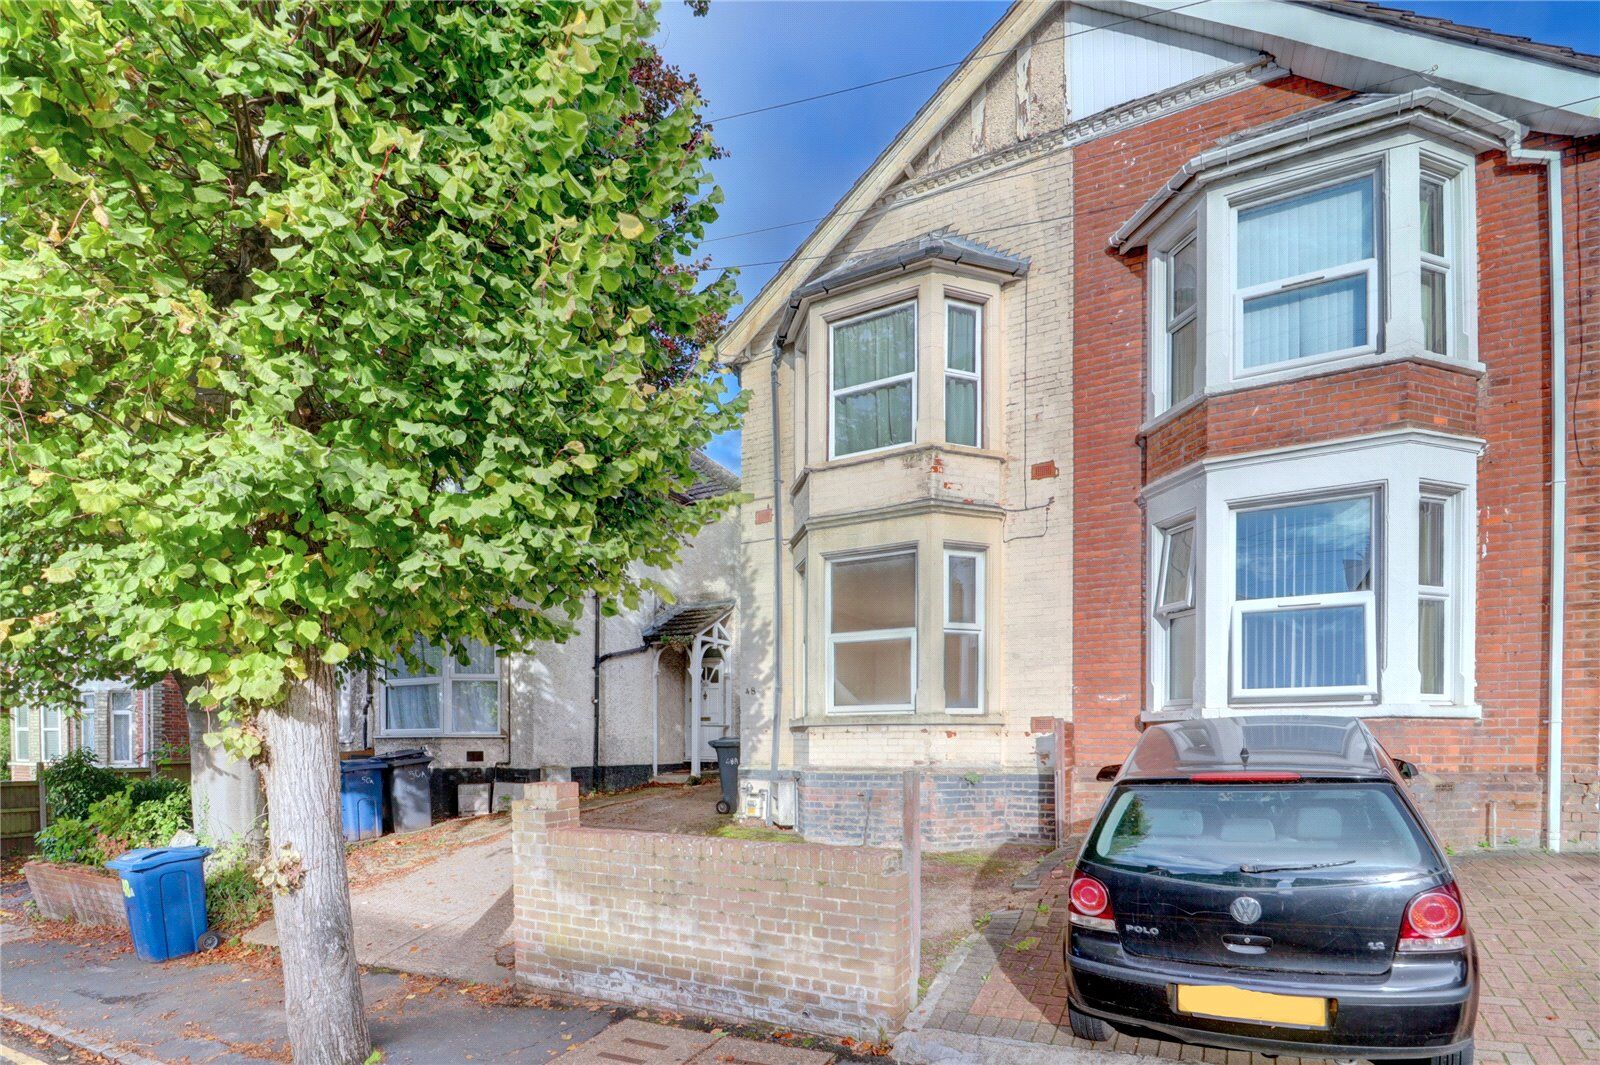 2 bedroom  maisonette for sale Priory Avenue, High Wycombe, HP13, main image